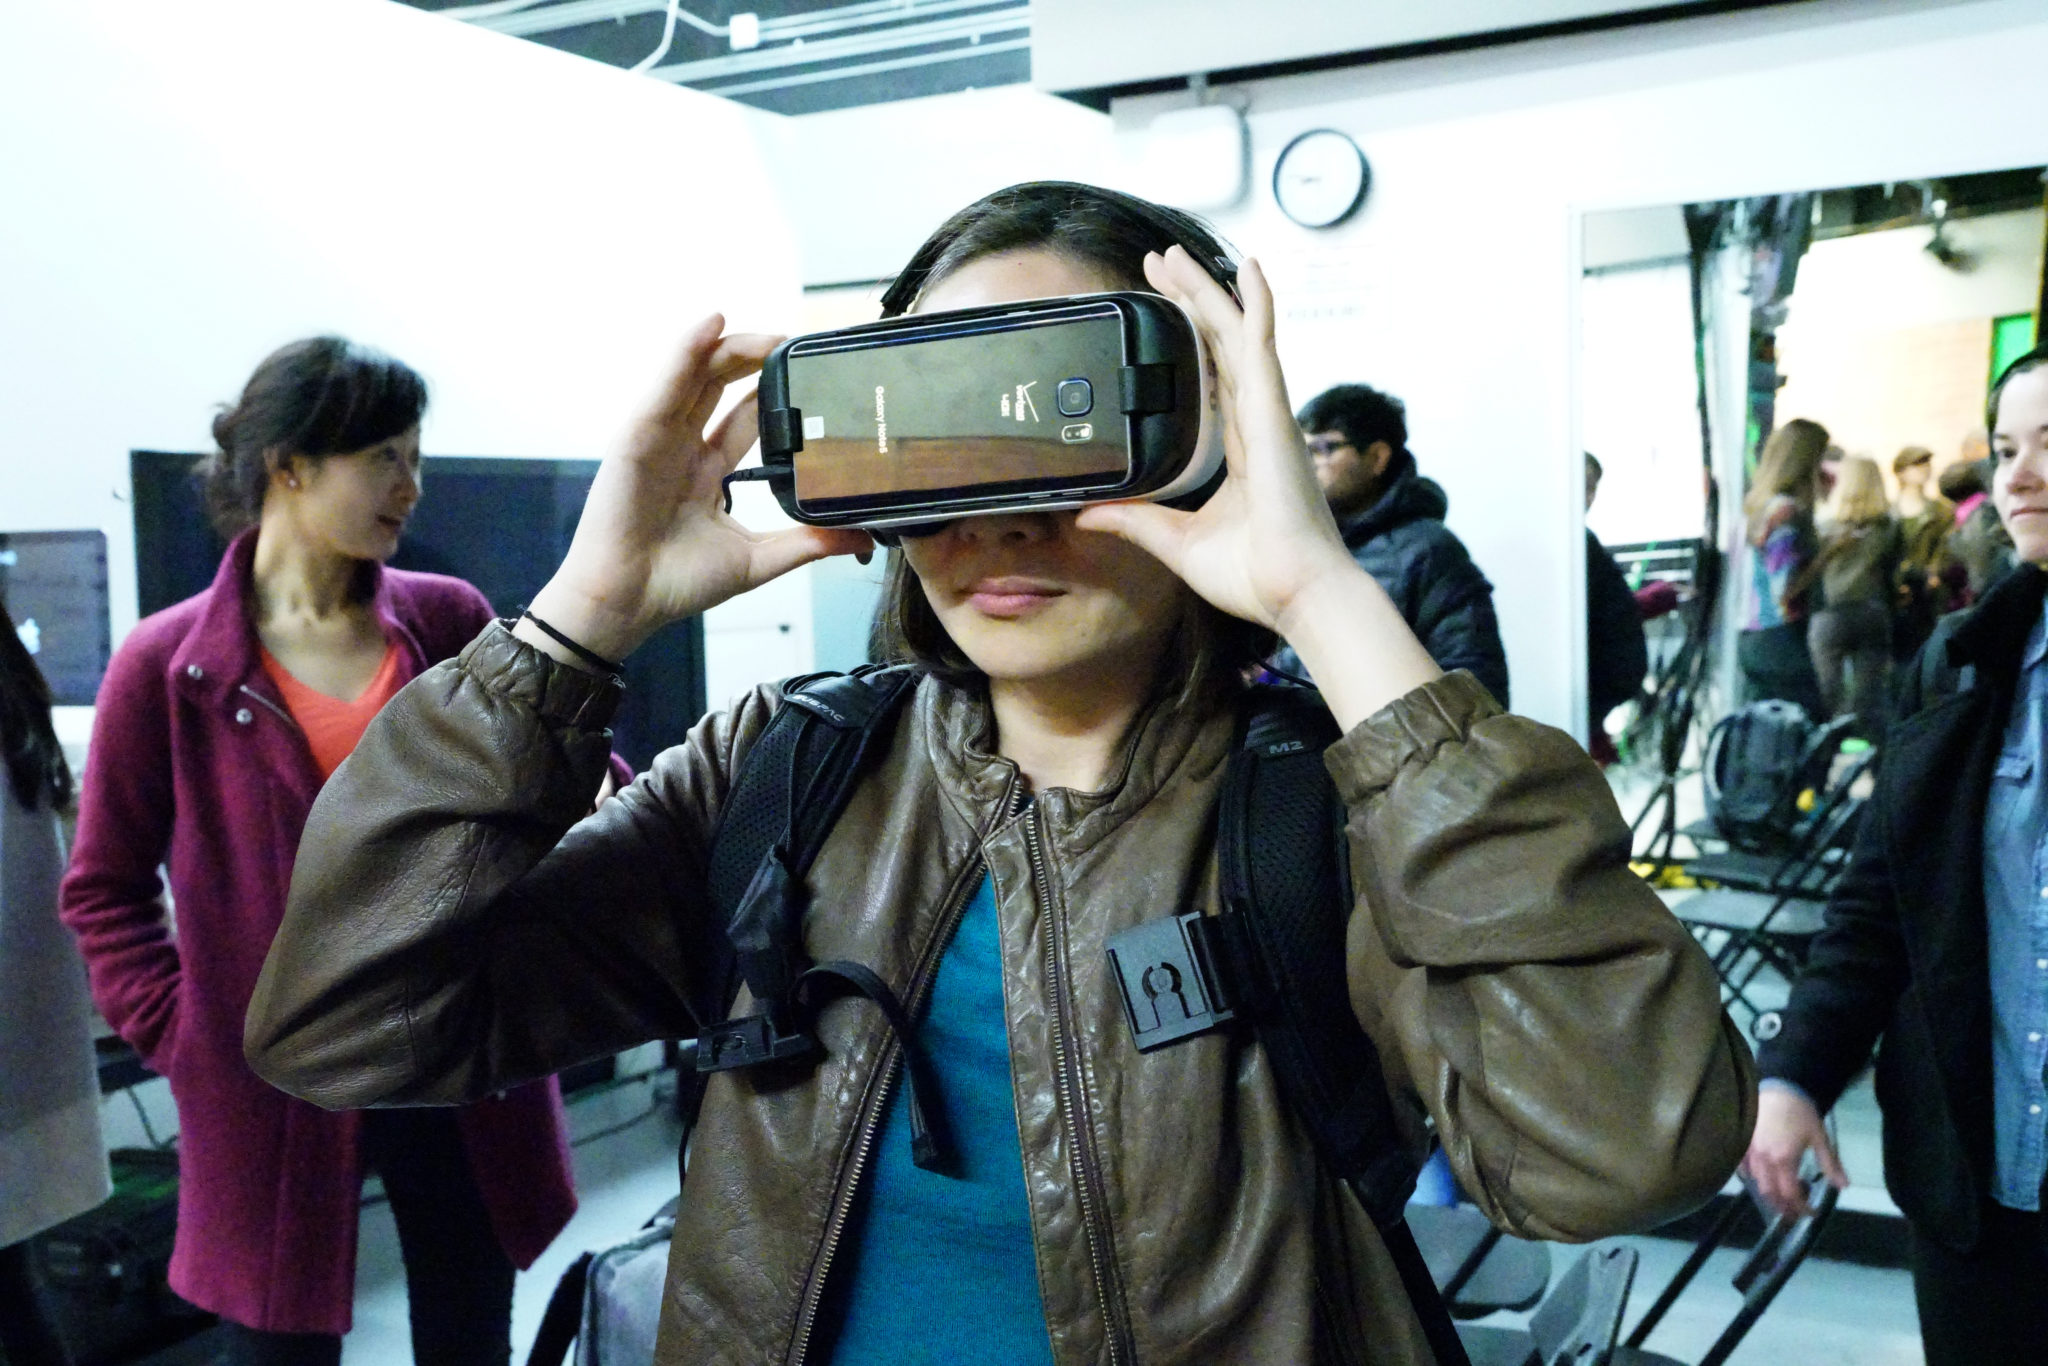 Student wearing virtual reality headset at a campus event